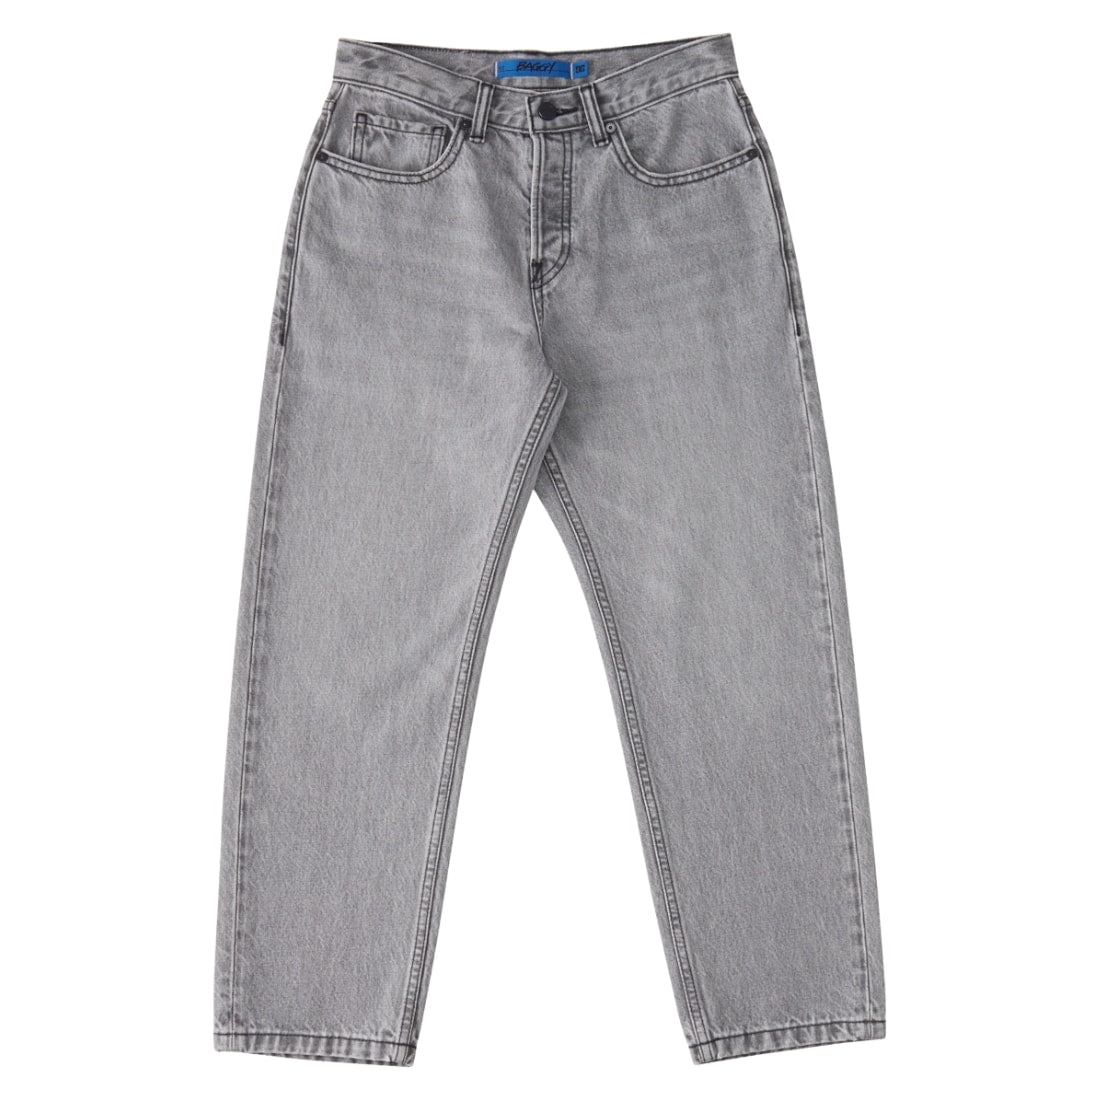 DC Boys Worker Baggy Denim Jeans - Grey Wash - Boys Relaxed/Loose Denim Jeans by DC